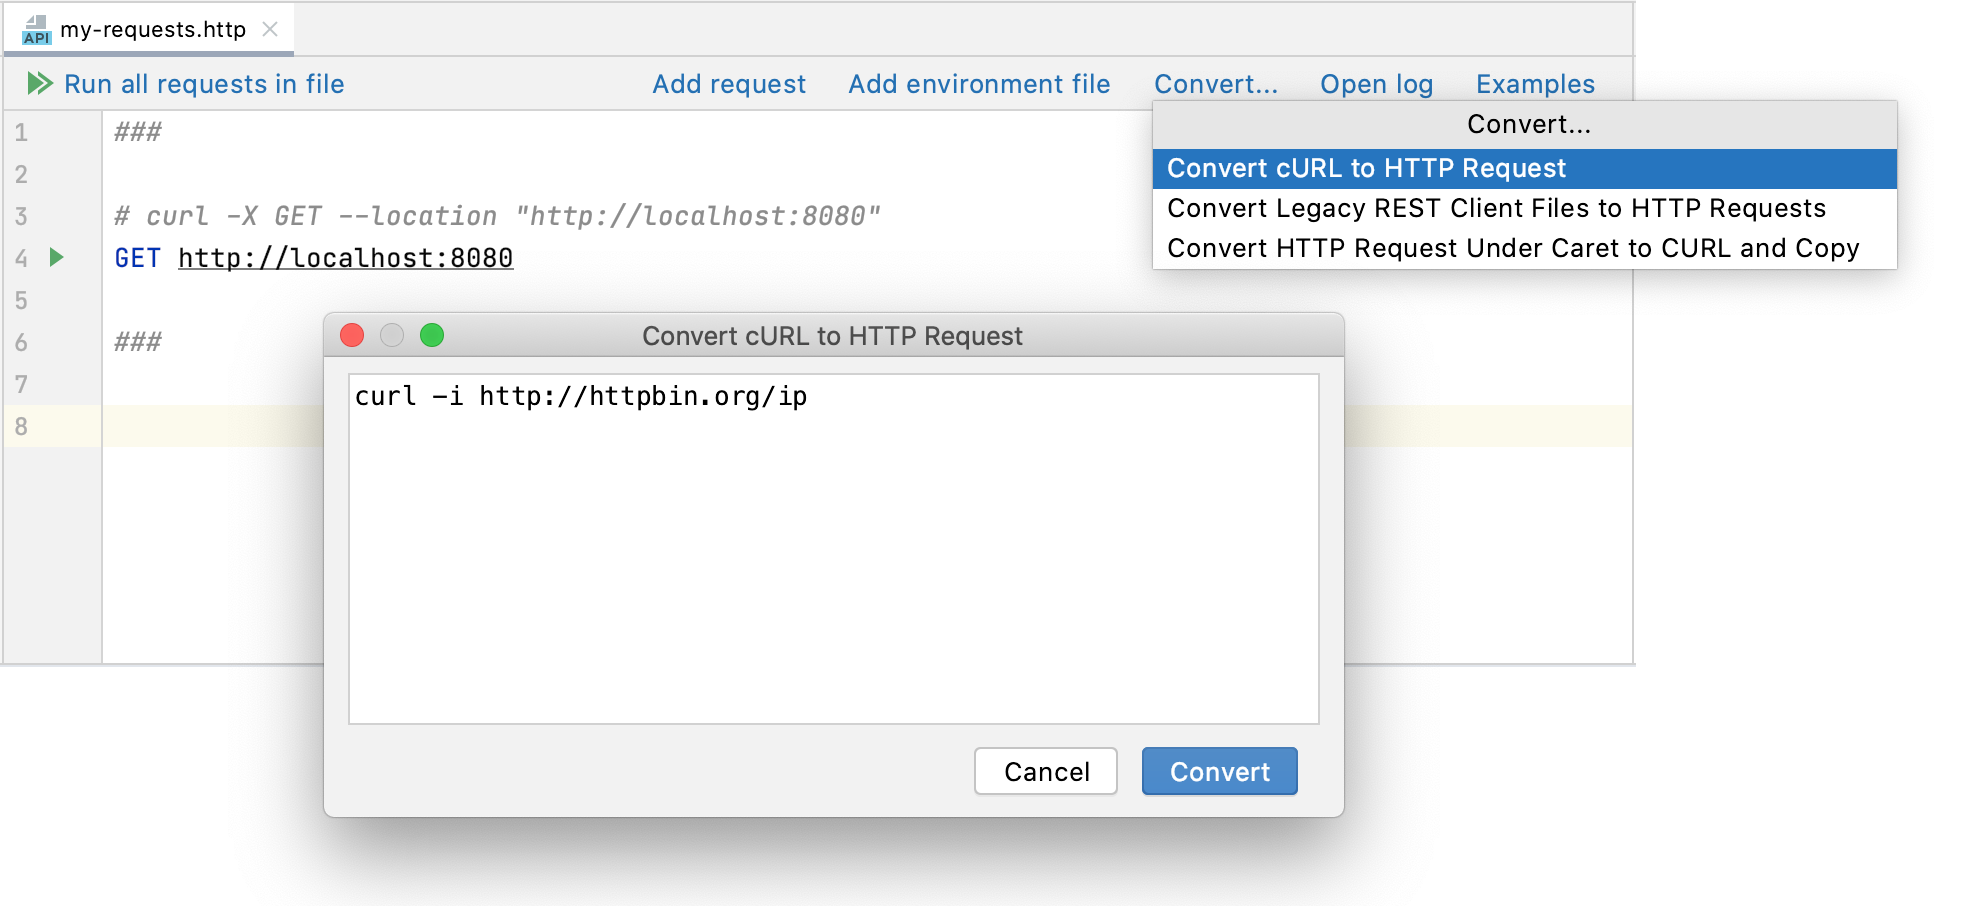 The Convert cURL to HTTP Request dialog